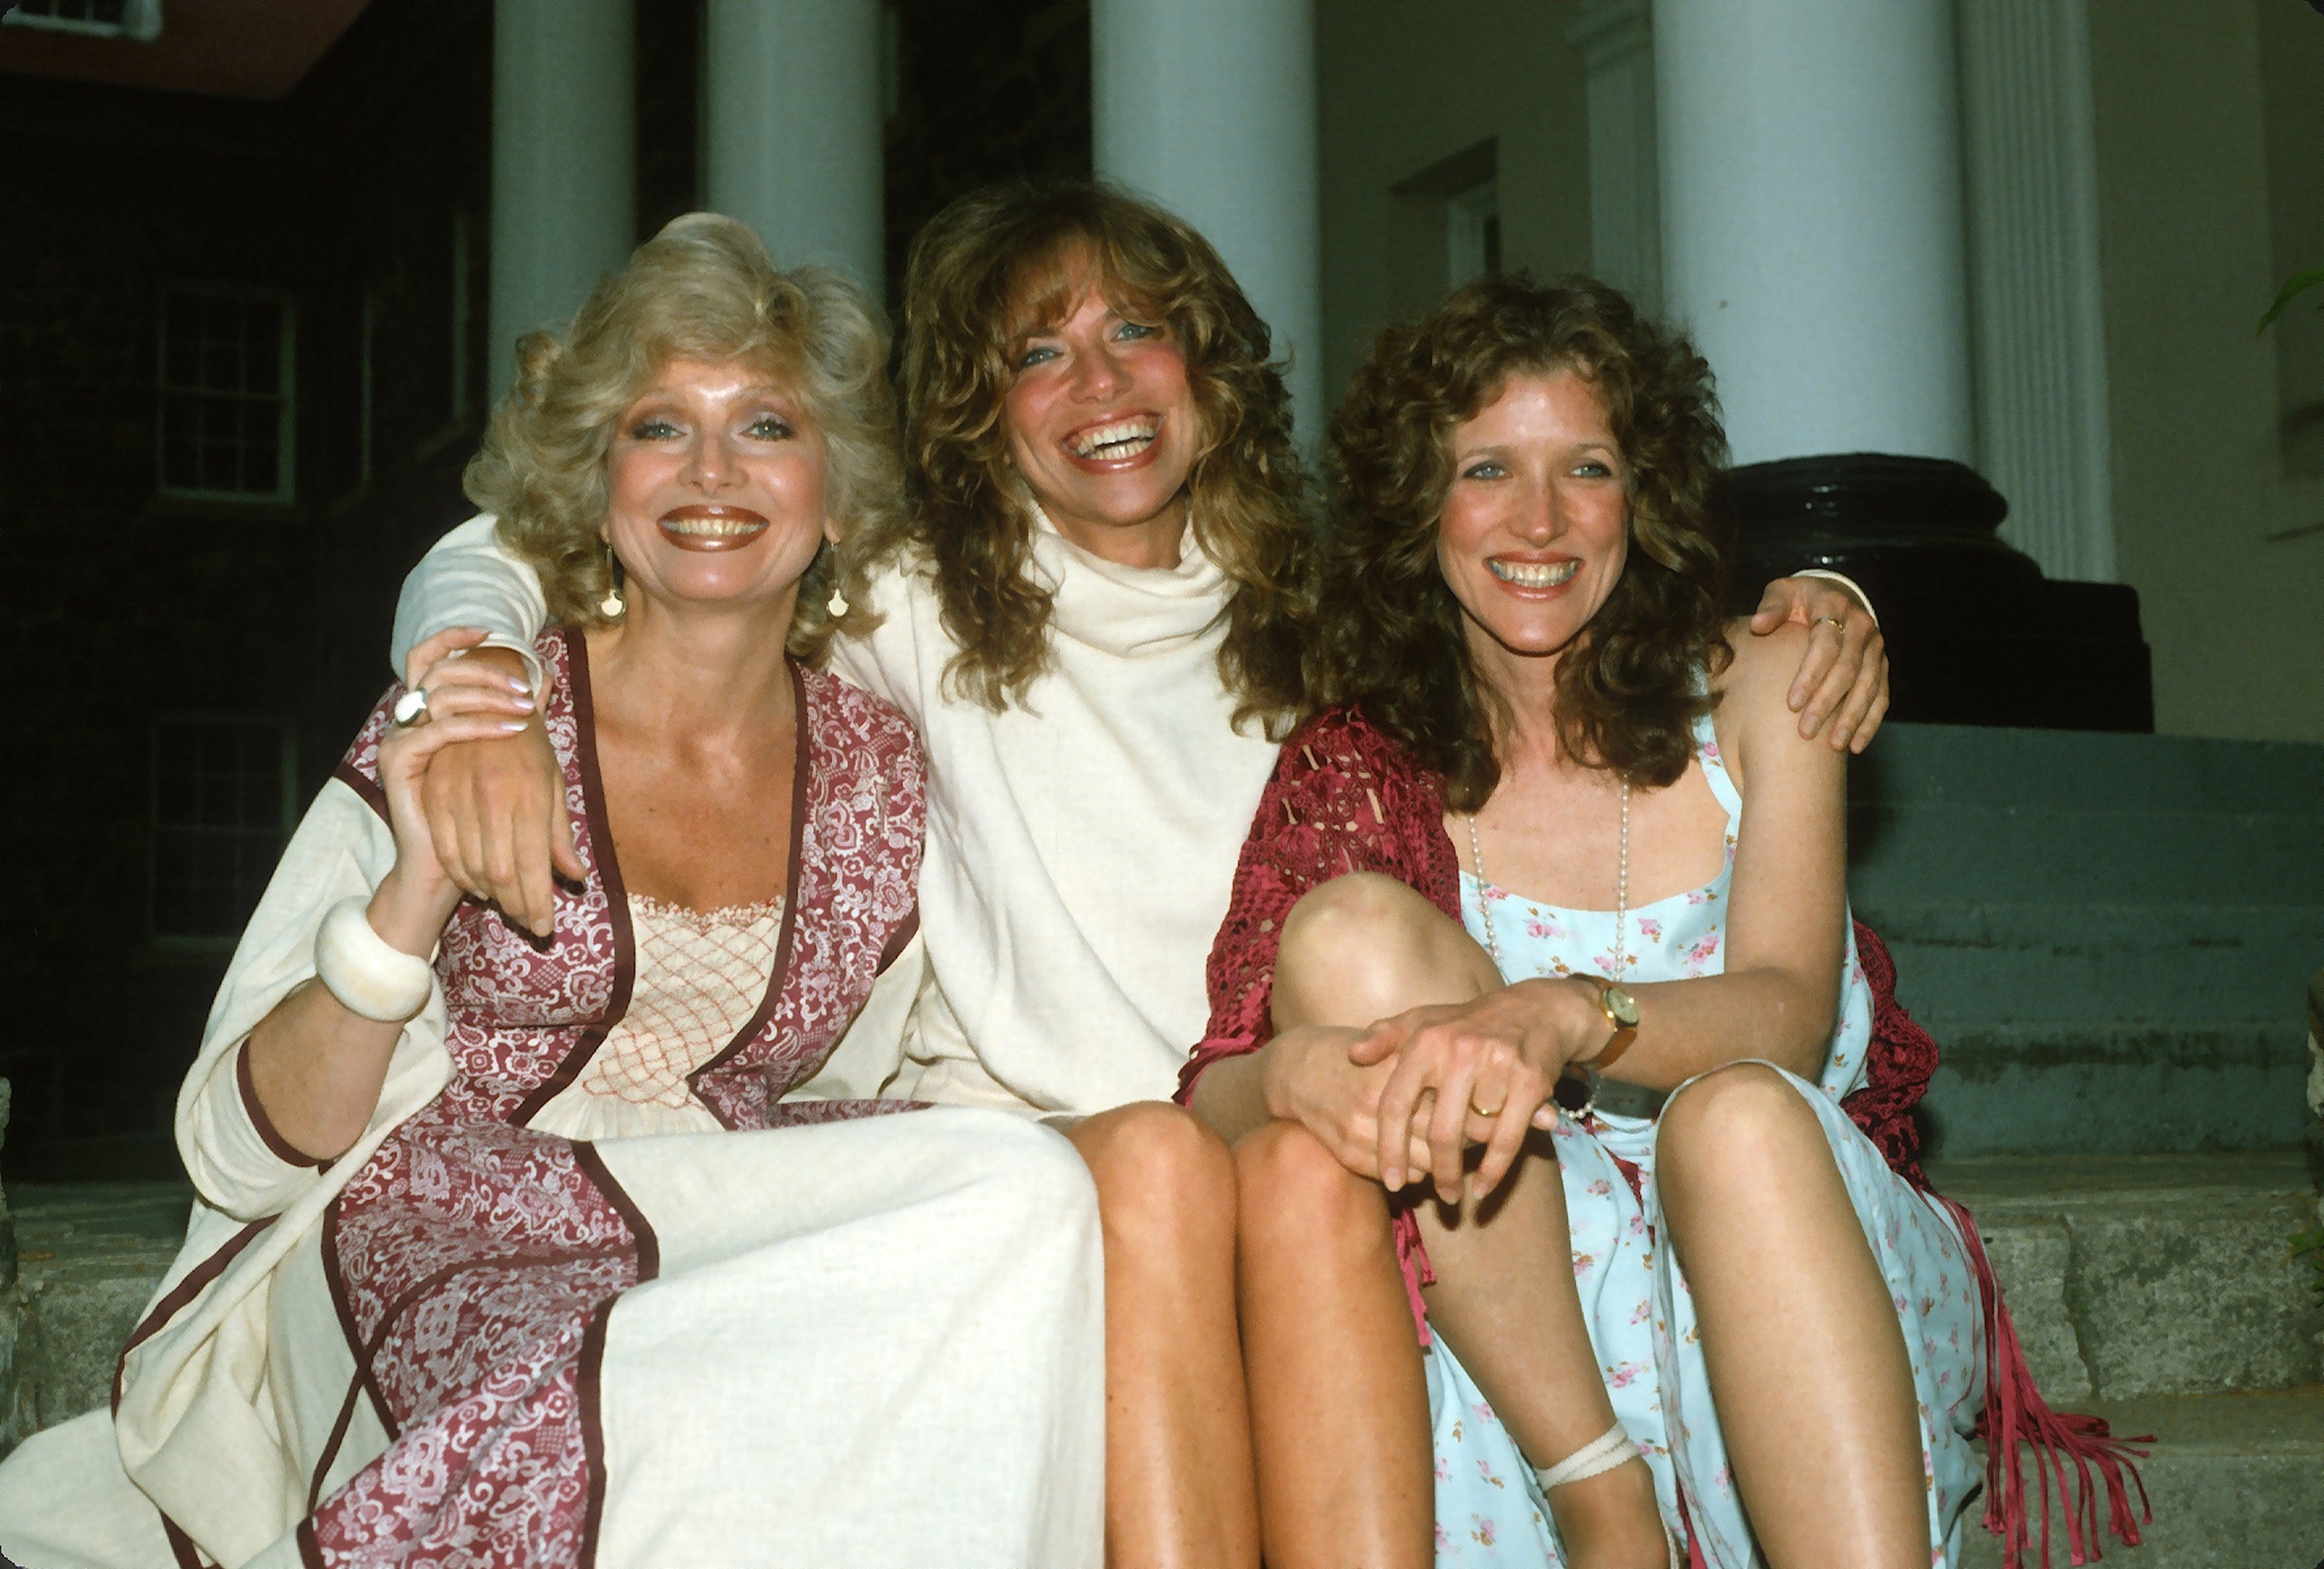 Joanna, Carly, and Lucy Simon pictured before their concert on May 12, 1982 in New York City ┃Source: Getty Images